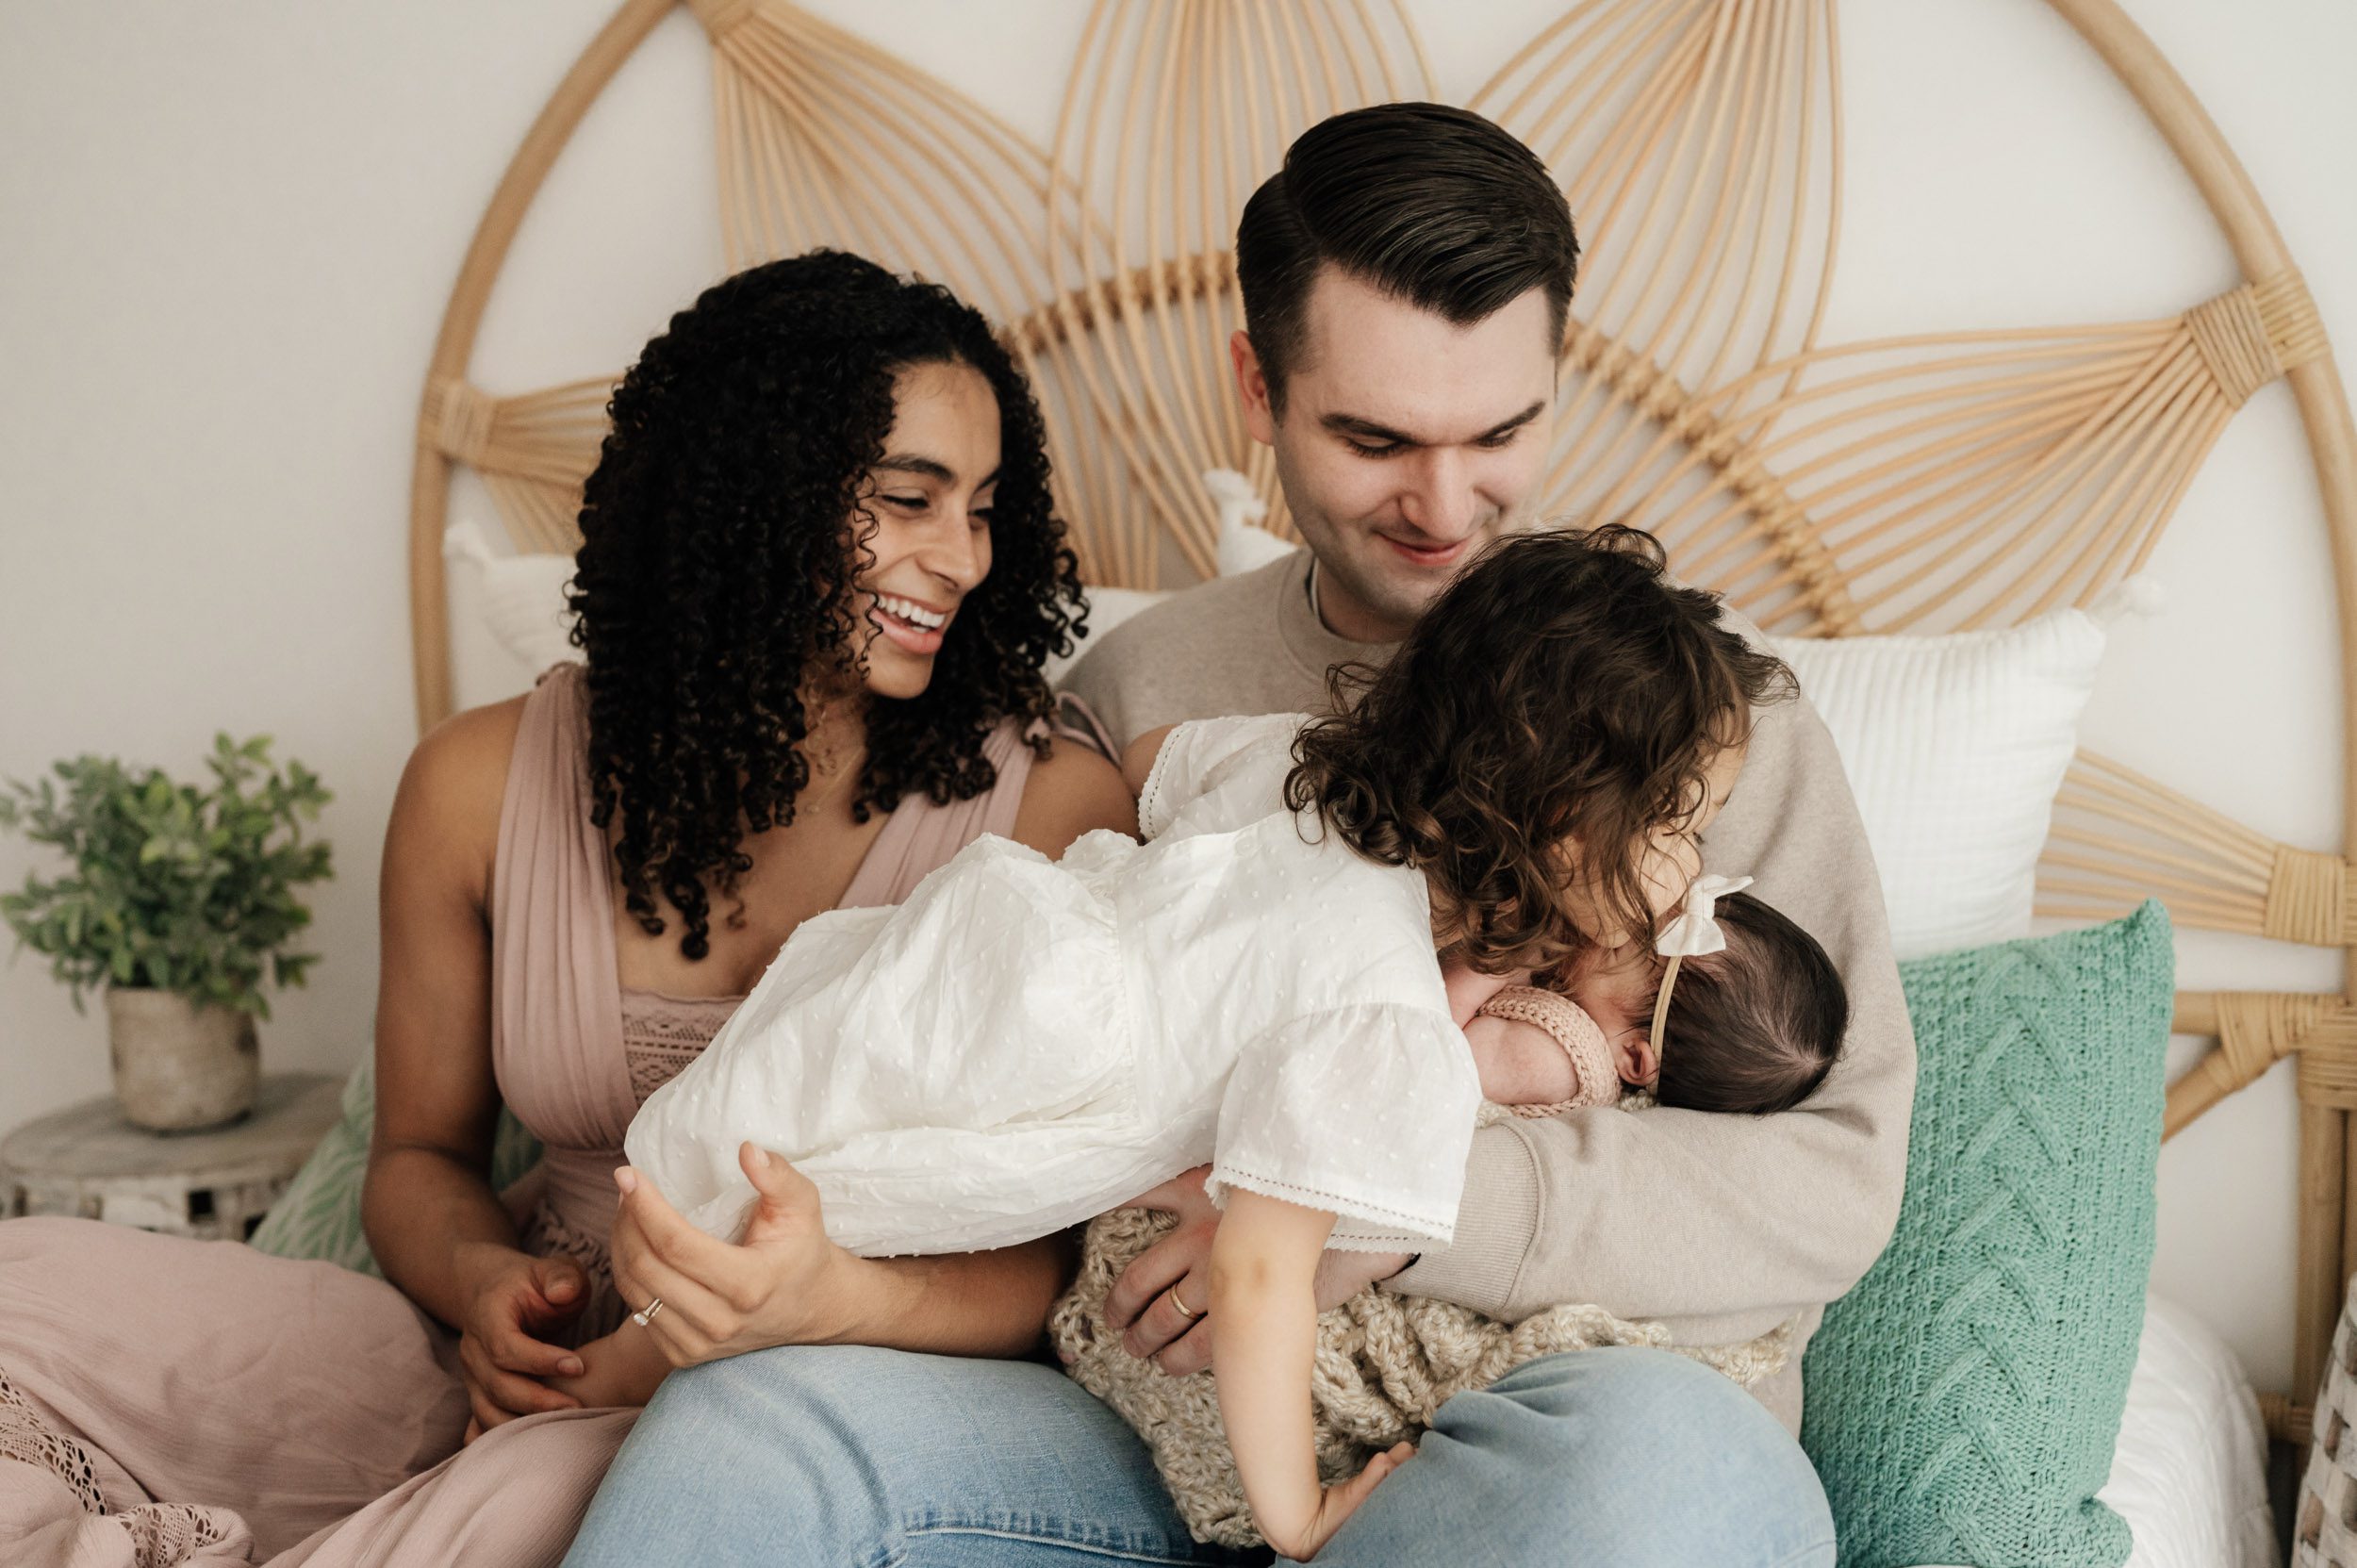 parents sitting on a bed holding their newborn baby girl and older daughter on their lap as big sister climbs across dad's lap and gives her baby sister a kiss on the head during a newborn photoshoot